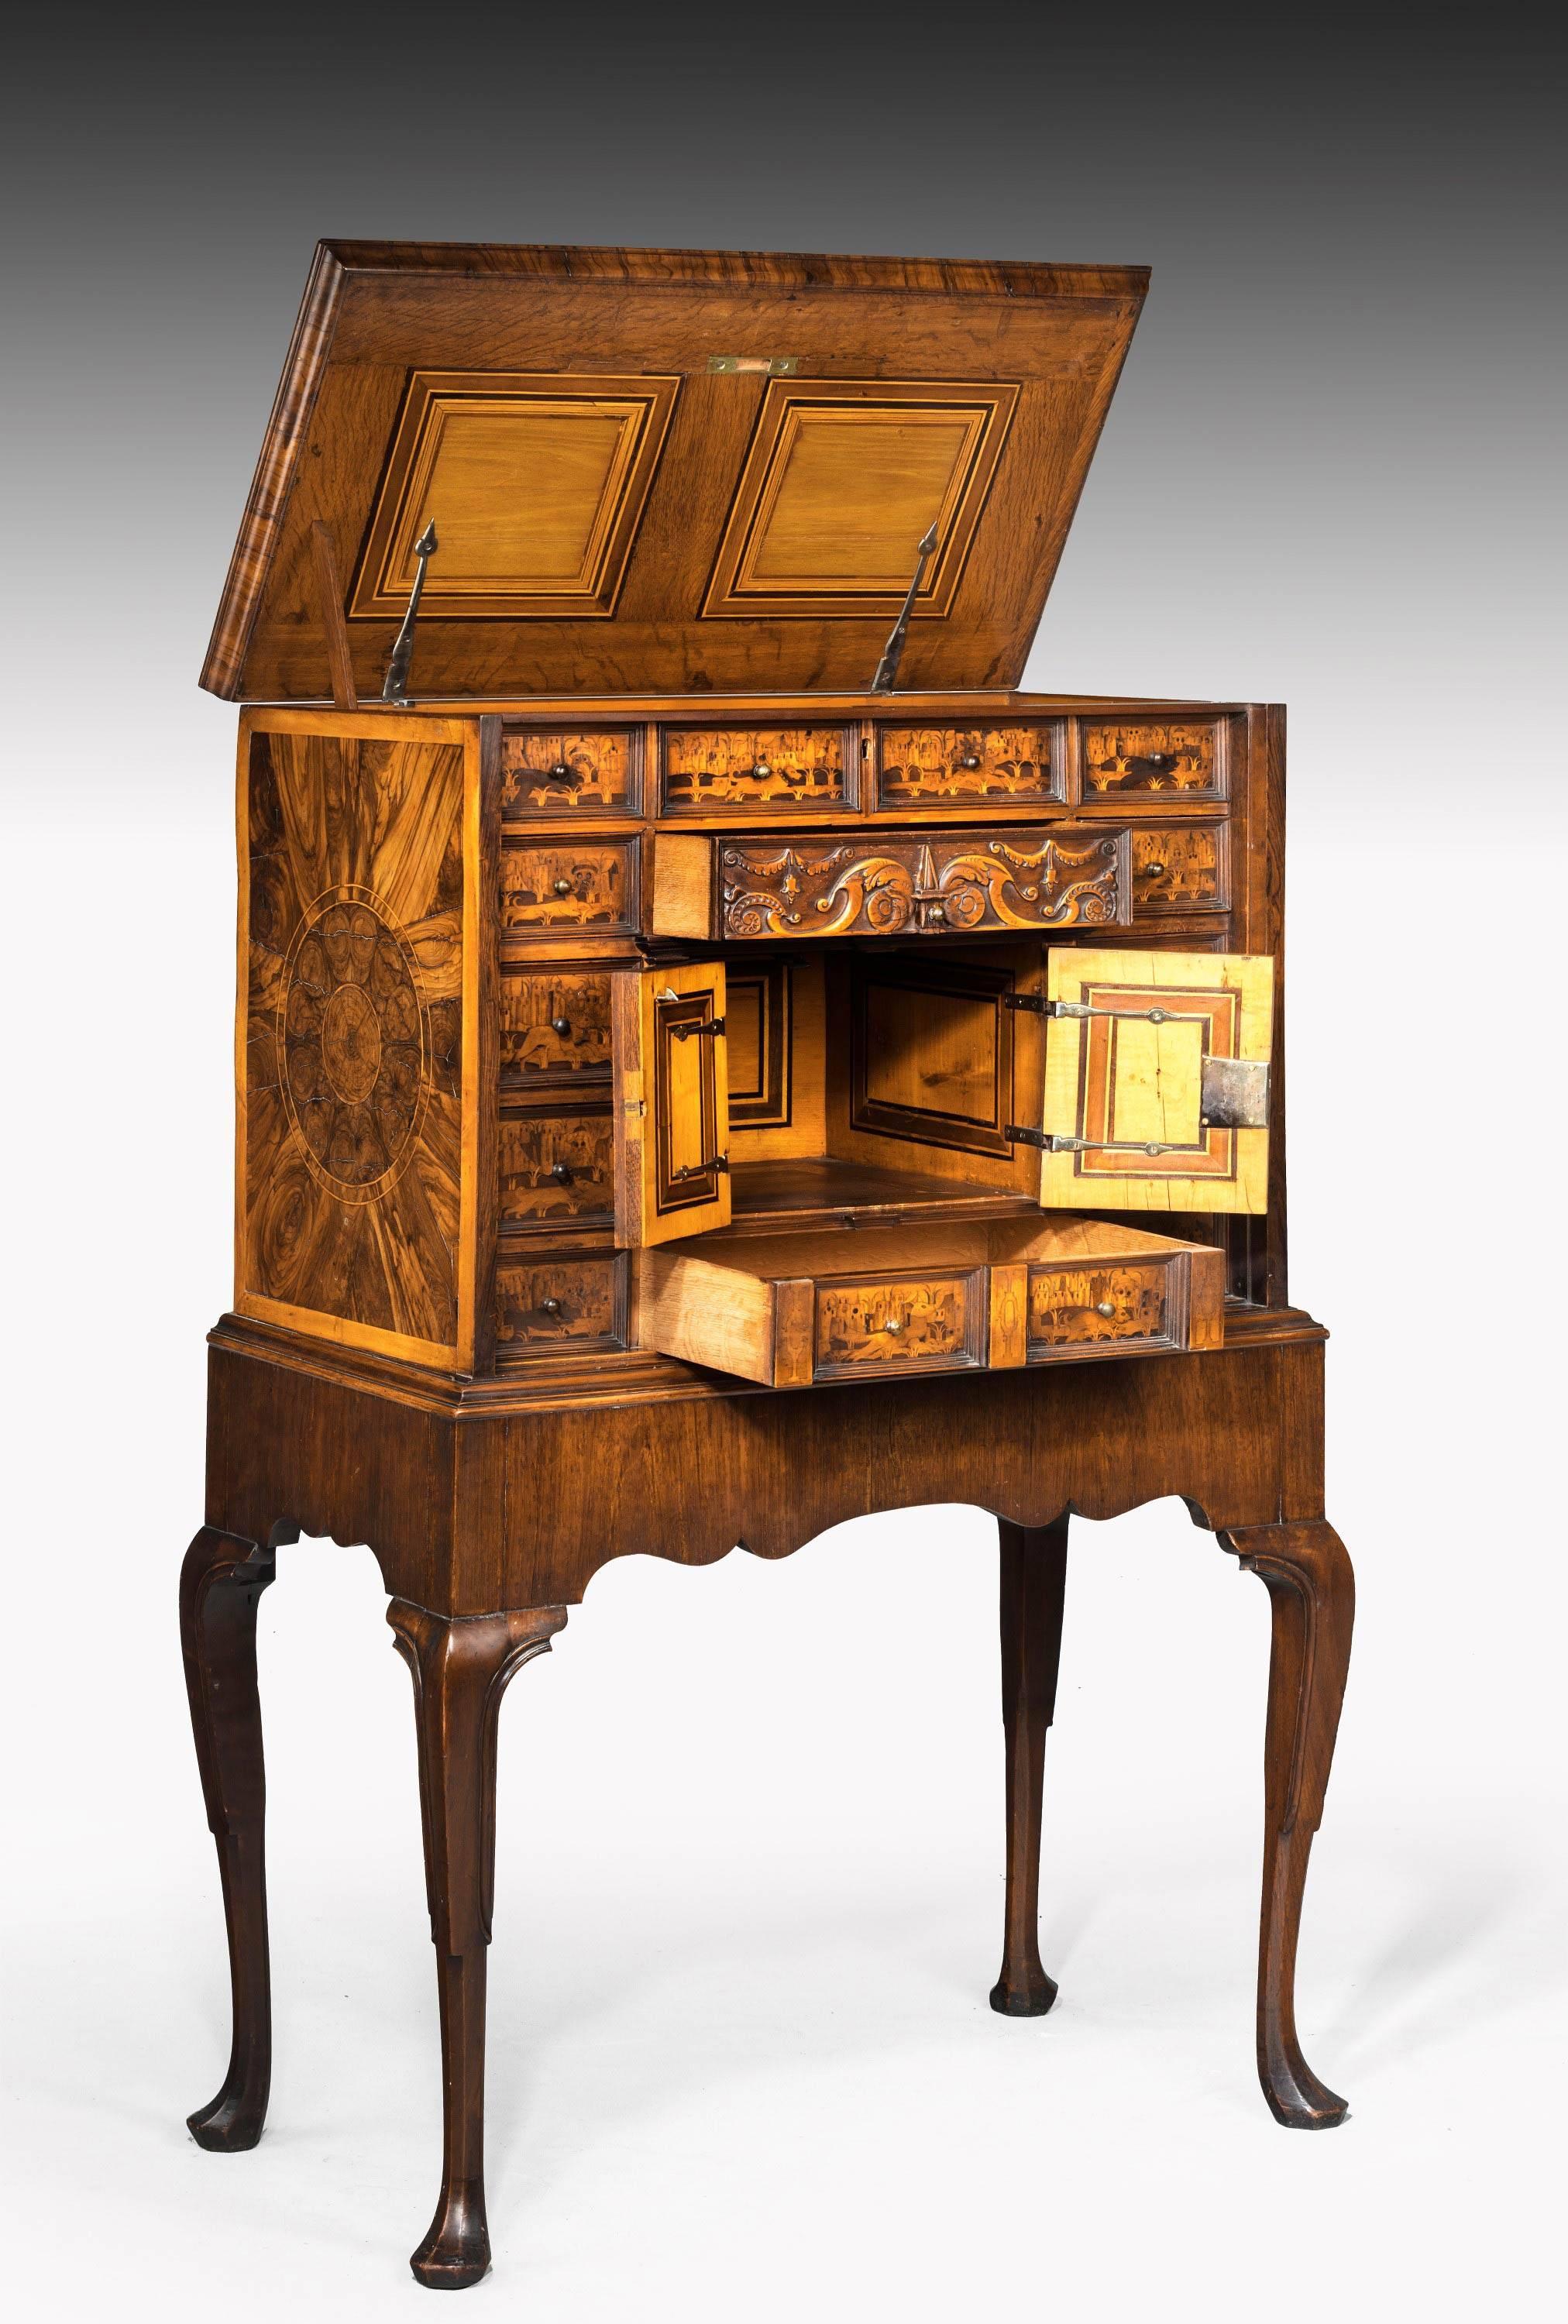 European Early 18th Century Continental Walnut Cabinet on Stand